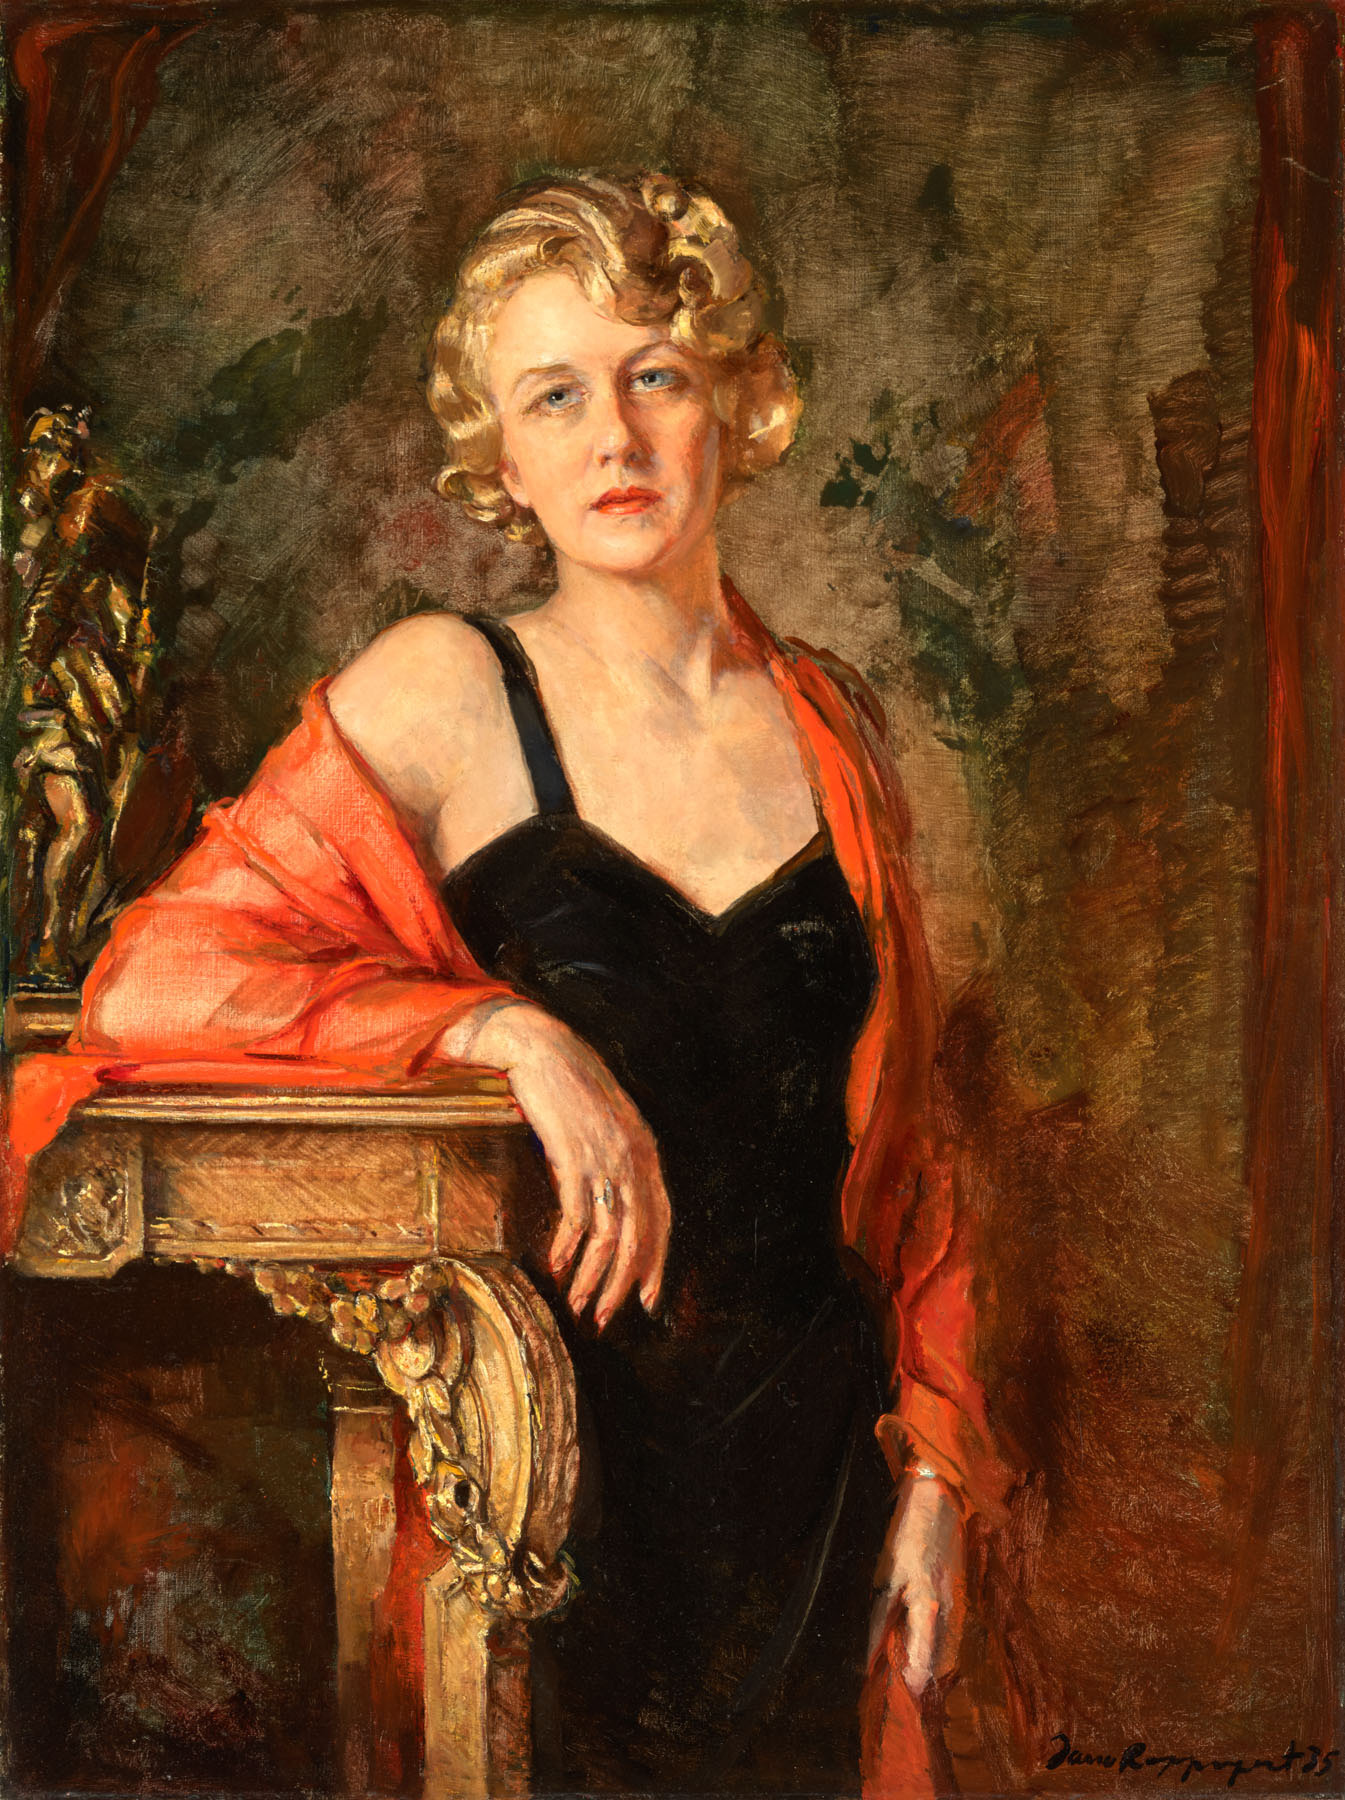 Painting of a woman wearing a black dress with a red shawl leaning on a fireplace mantel.